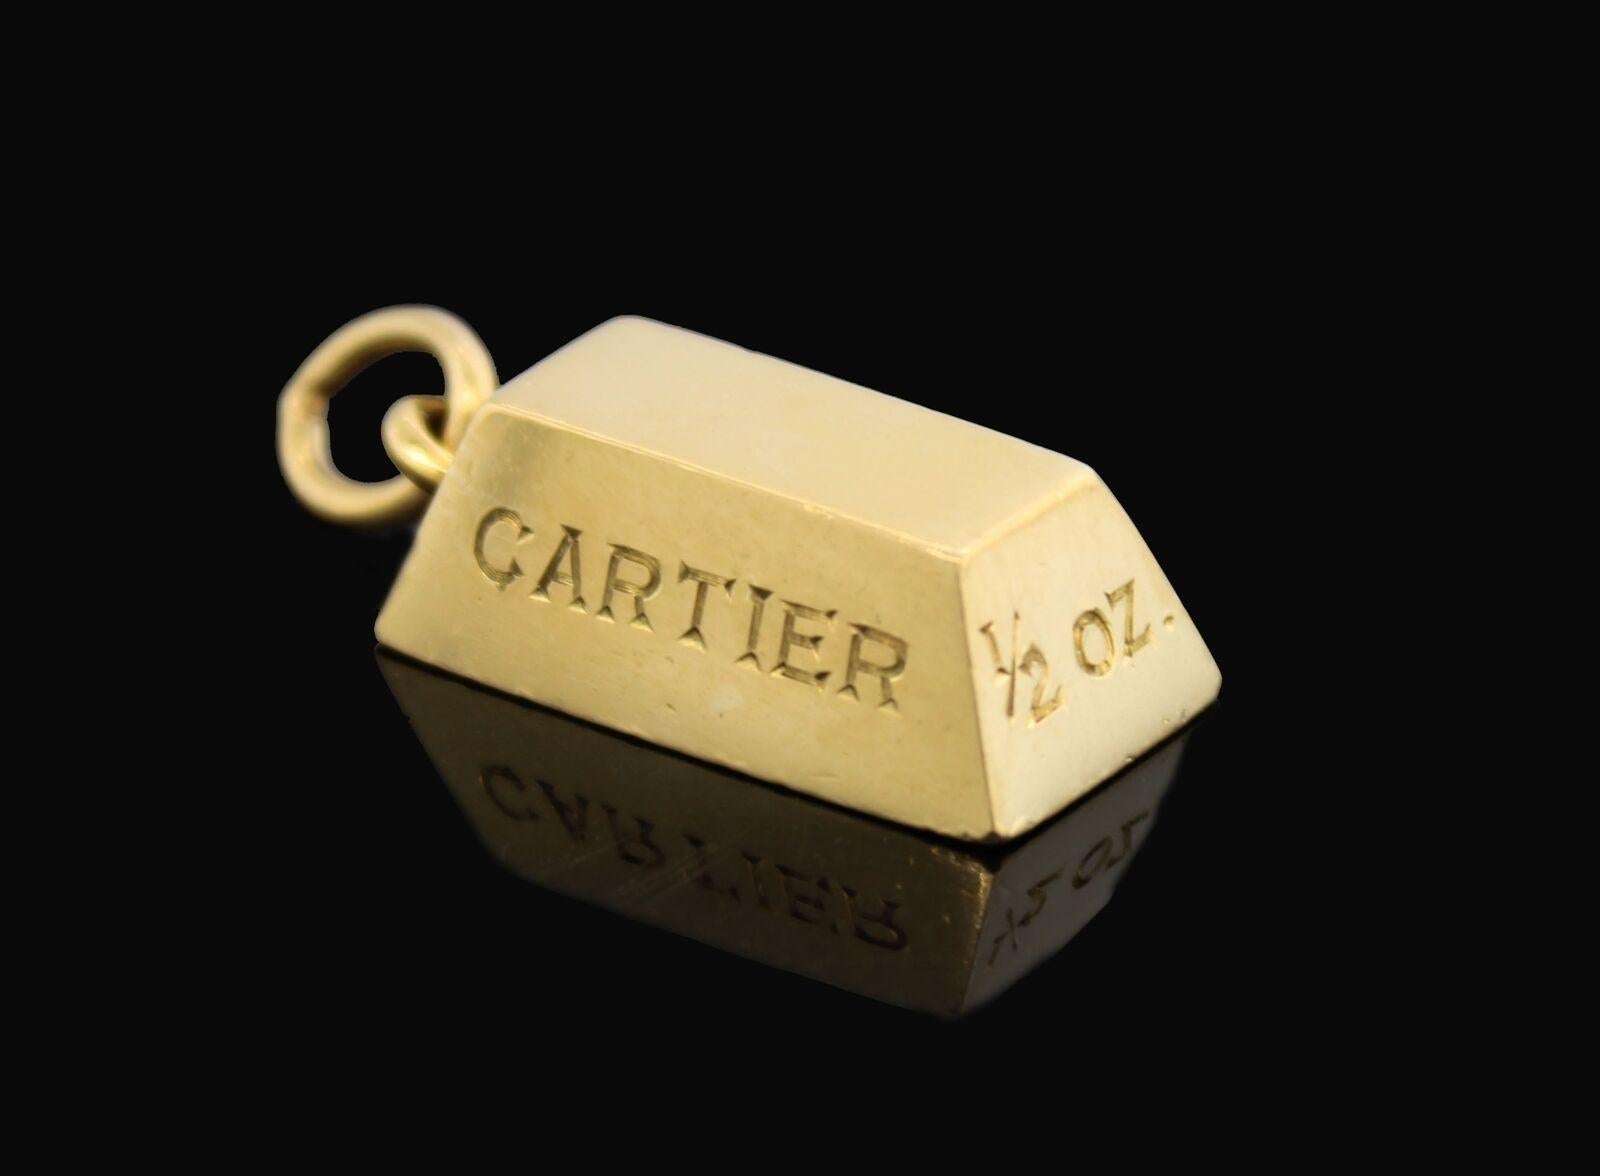 Cartier 18k Yellow Gold 1/2 Oz Ingot Charm Pendant Vintage Circa 1970s


Here is your chance to purchase a beautiful and highly collectible designer charm pendant.  Truly a great piece at a great price! 


Details:

Cartier 18k Yellow Gold 1/2 Half